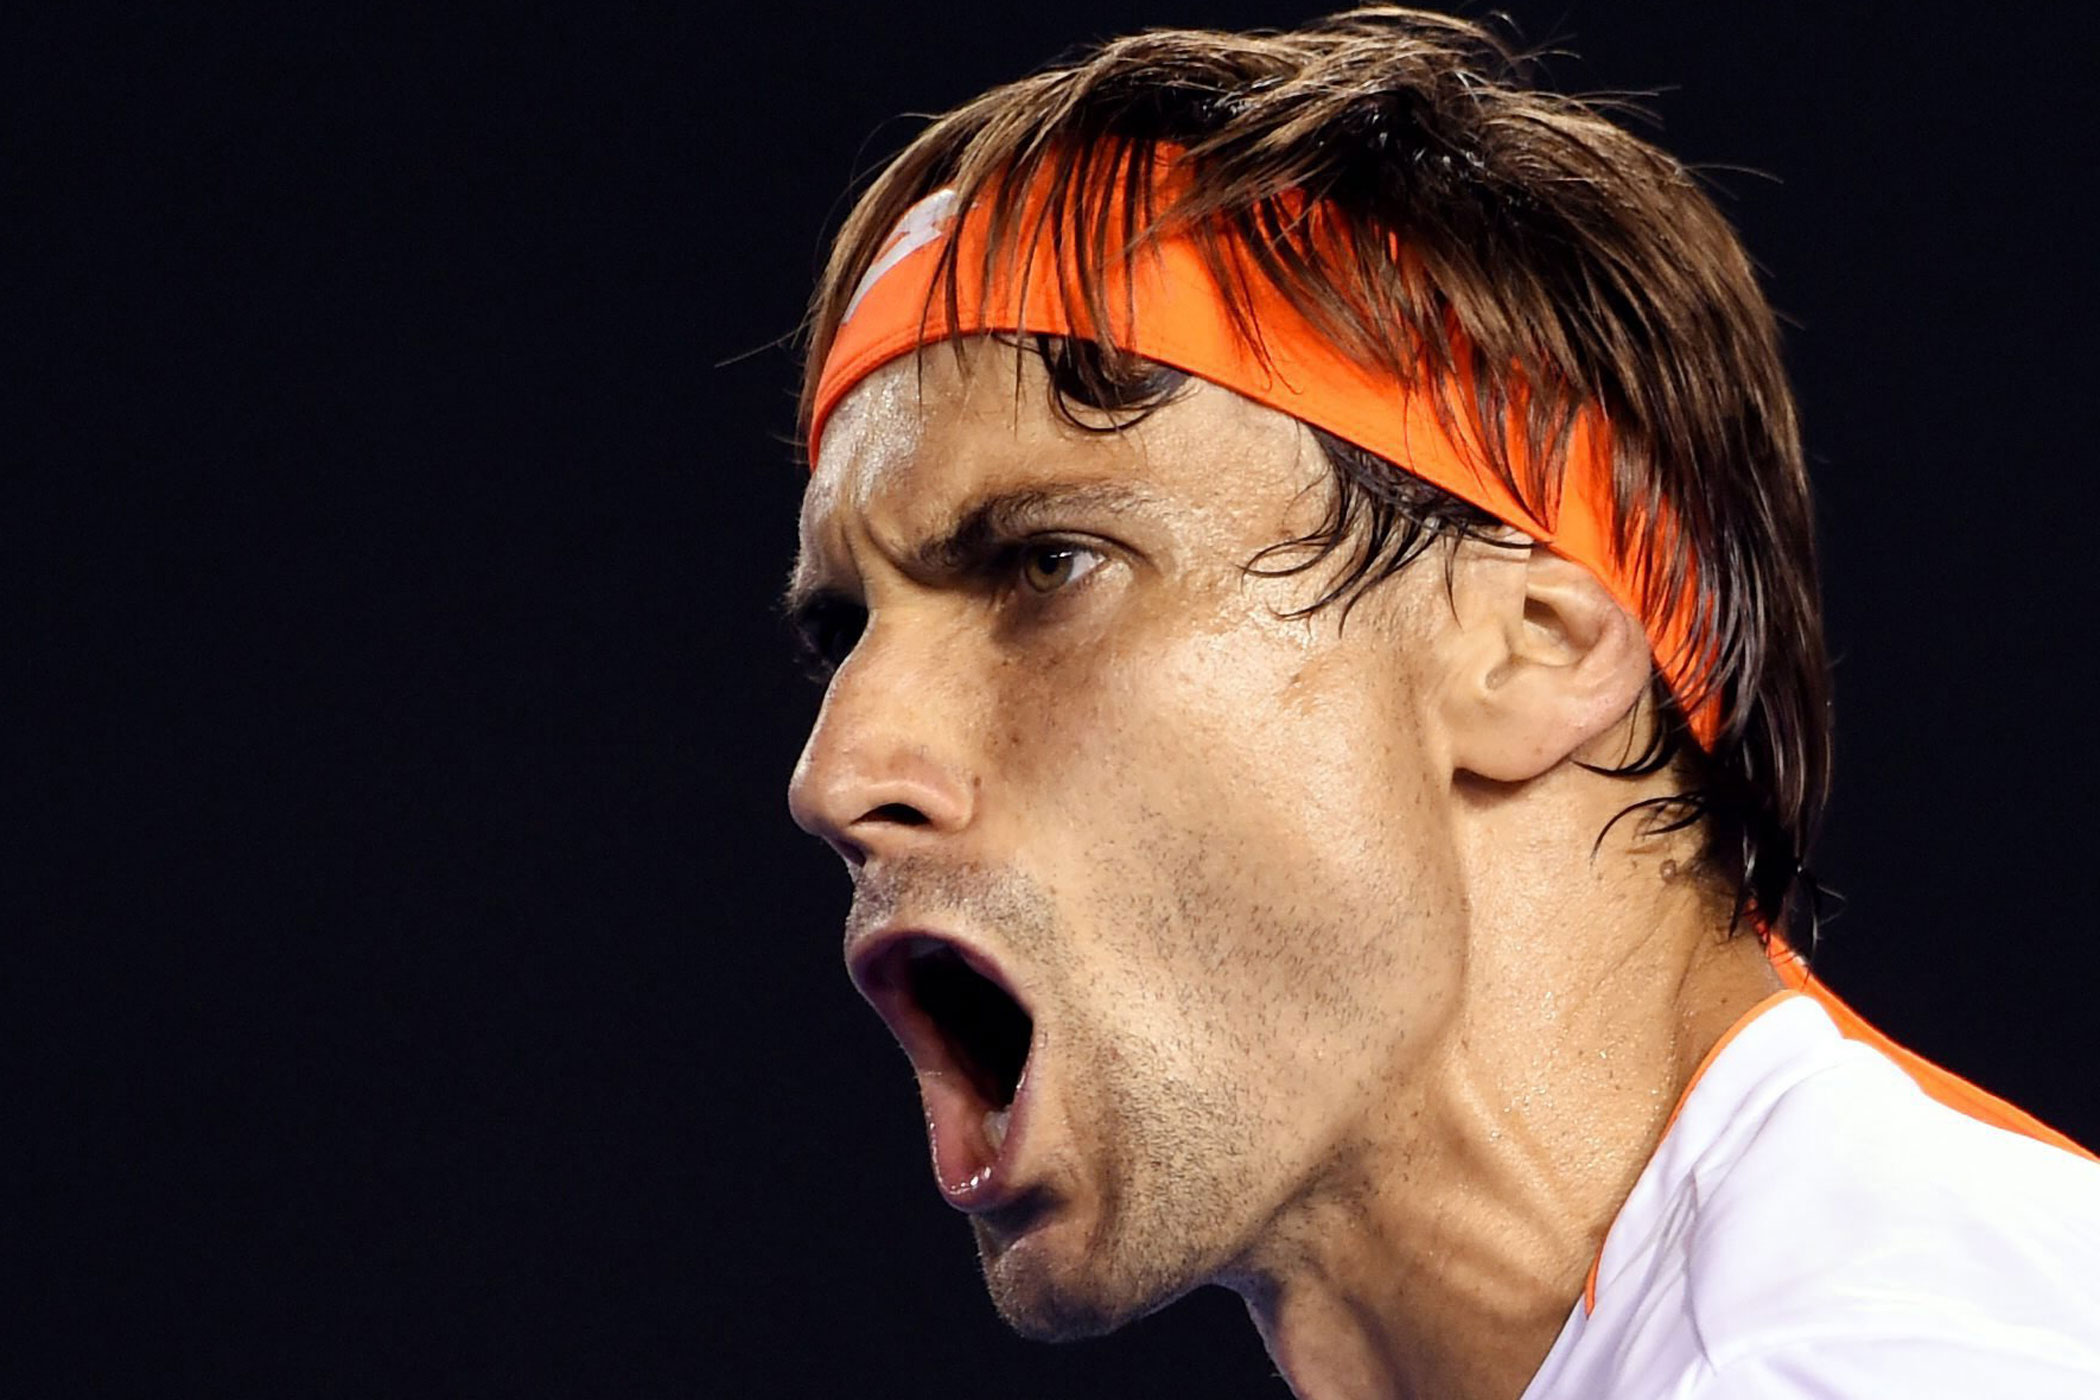 2016 Australian Open Spain's David Ferrer of Spain celebrates during his quarter final match against Britain's Andy Murray on Jan. 27.